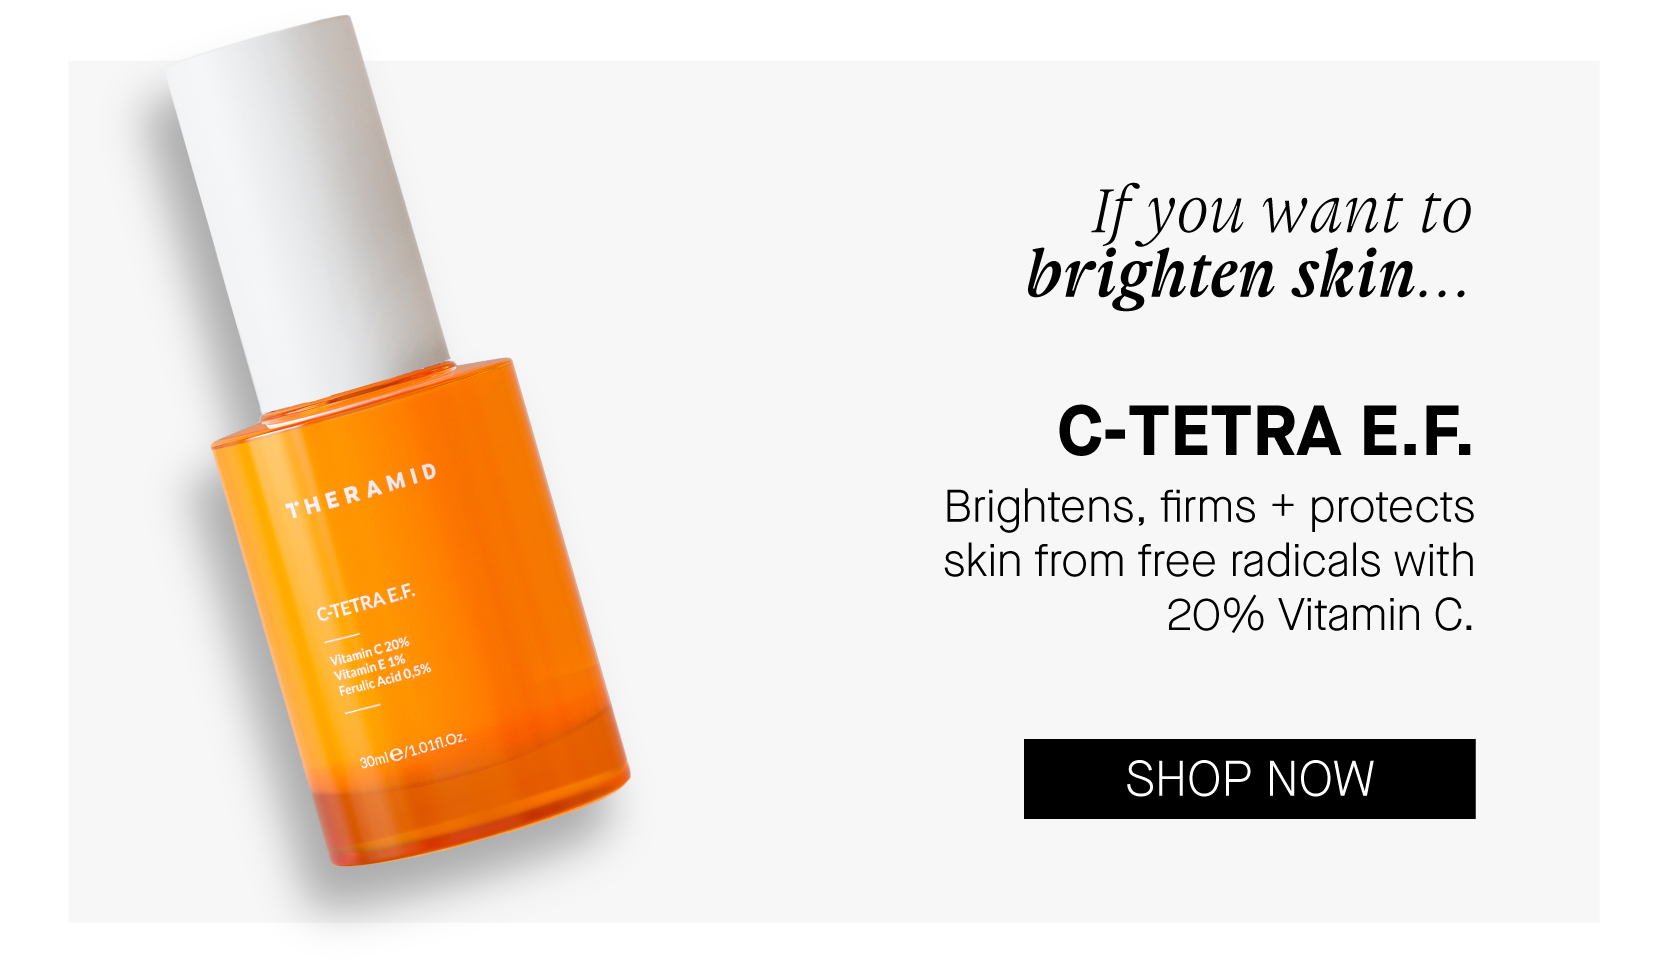  If you want to brighten skin... C-TETRAE.F. Brightens, firms protects skin from free radicals with 20% Vitamin C. SHOP NOW 